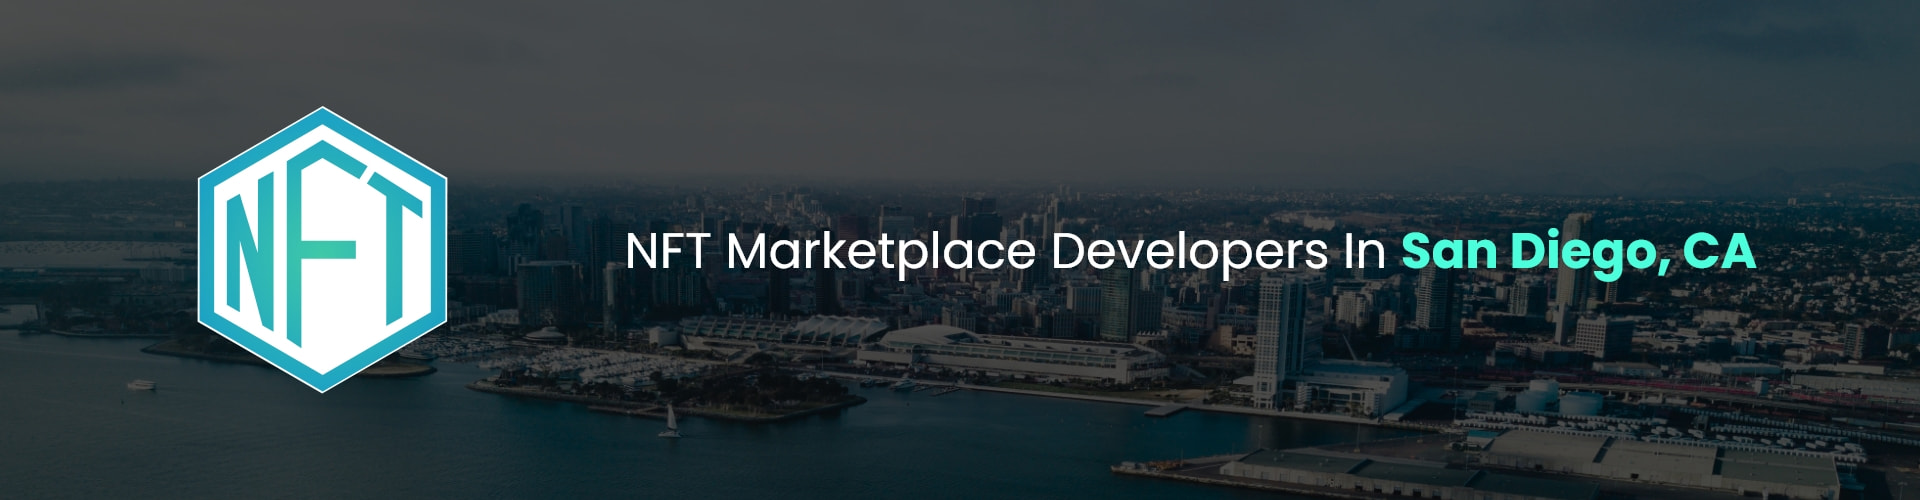 hire nft marketplace developers in san diego